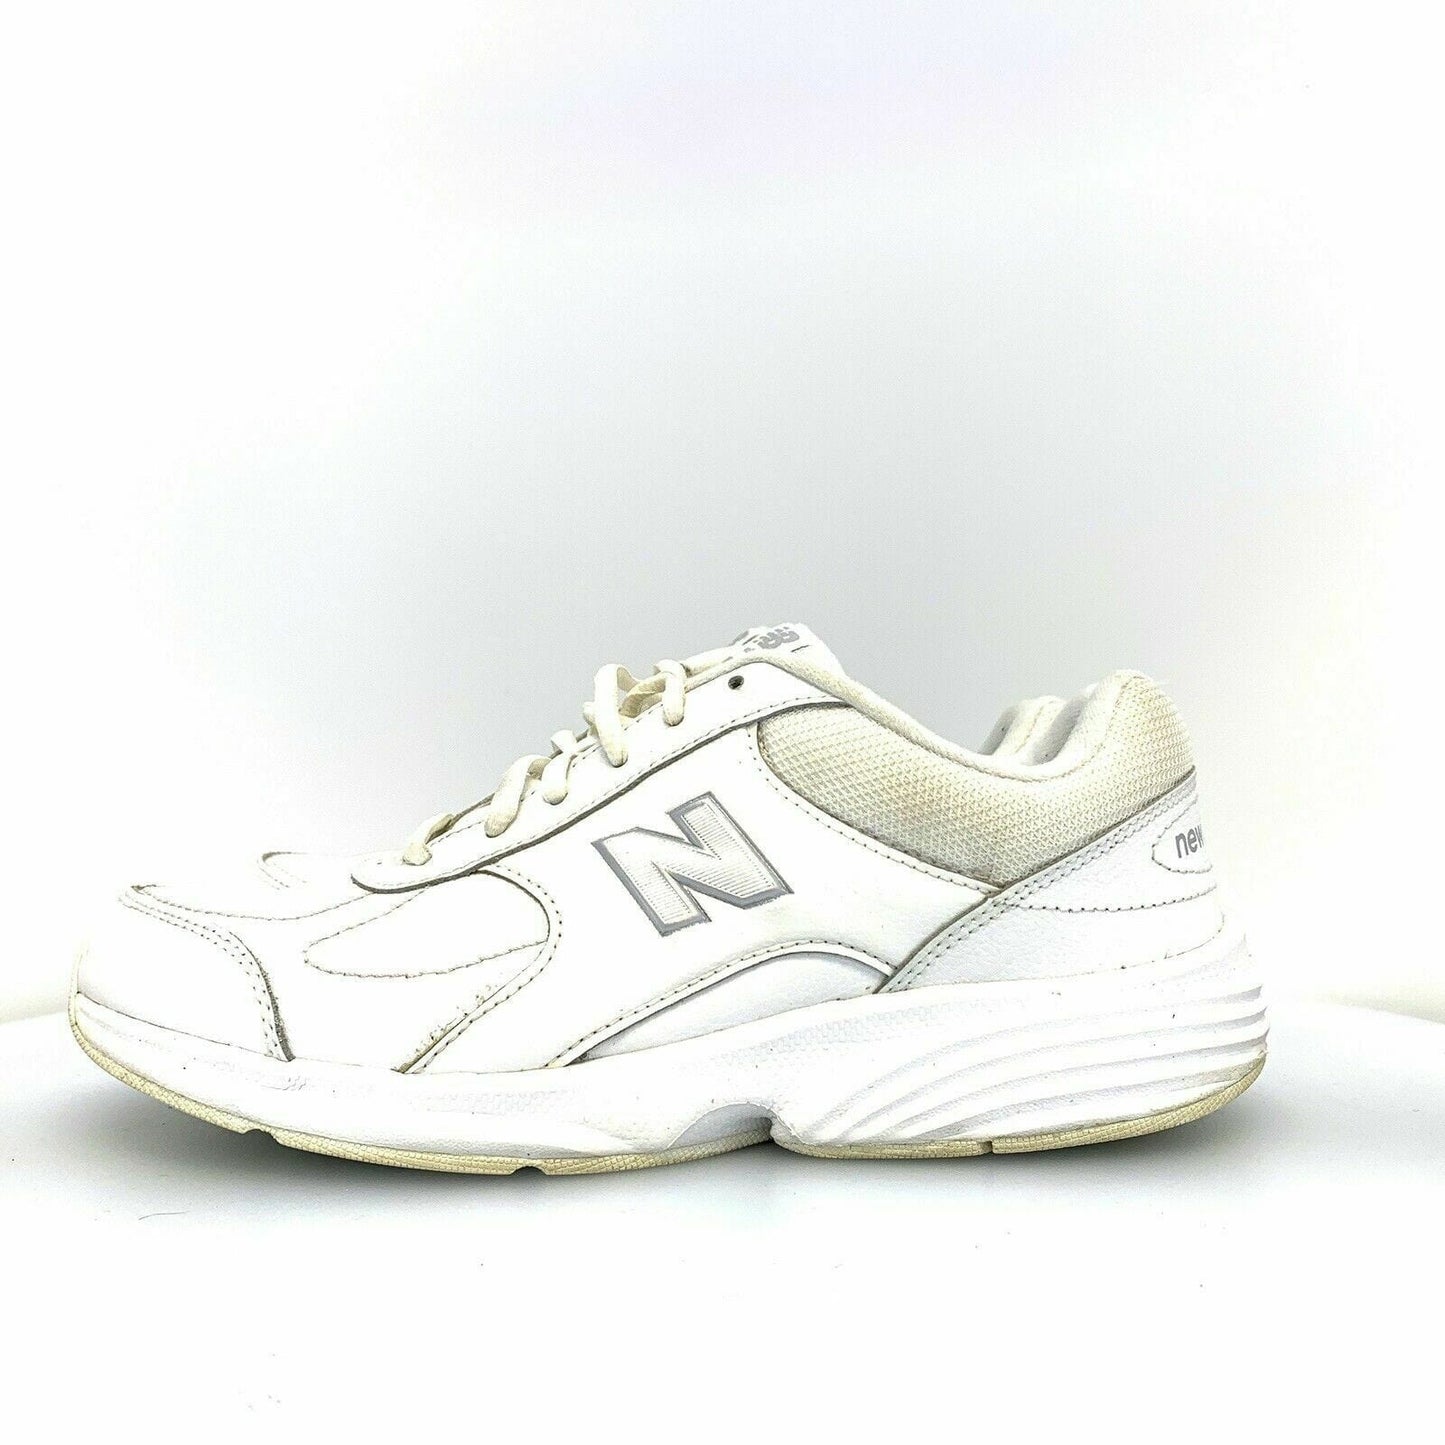 Comfortable New Balance Womens Size 9D White Athletic Shoes - Versatile Sneakers